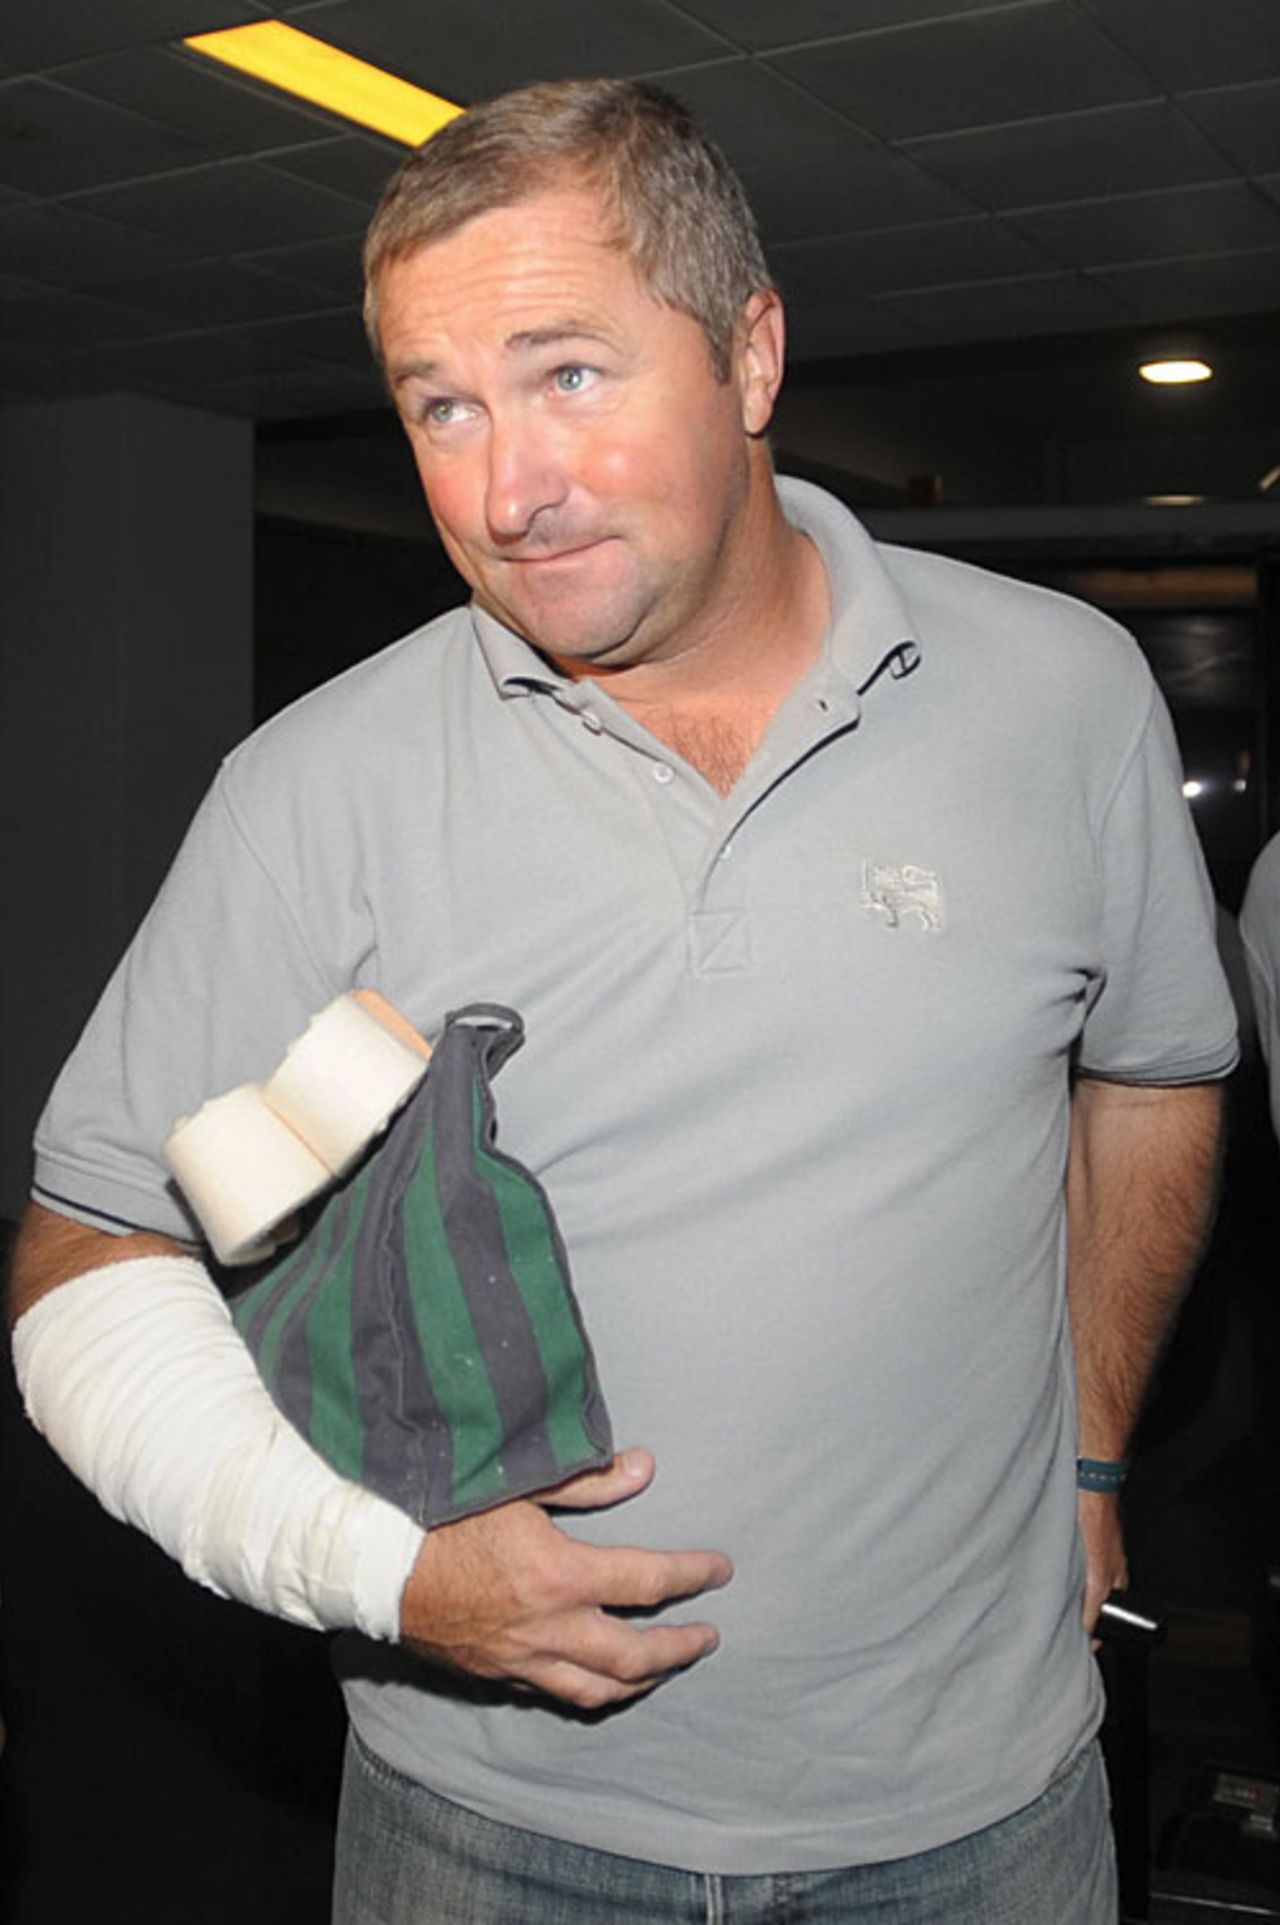 Sri Lanka assistant coach Paul Farbrace with his hand in a cast, Colombo, March 3, 2009